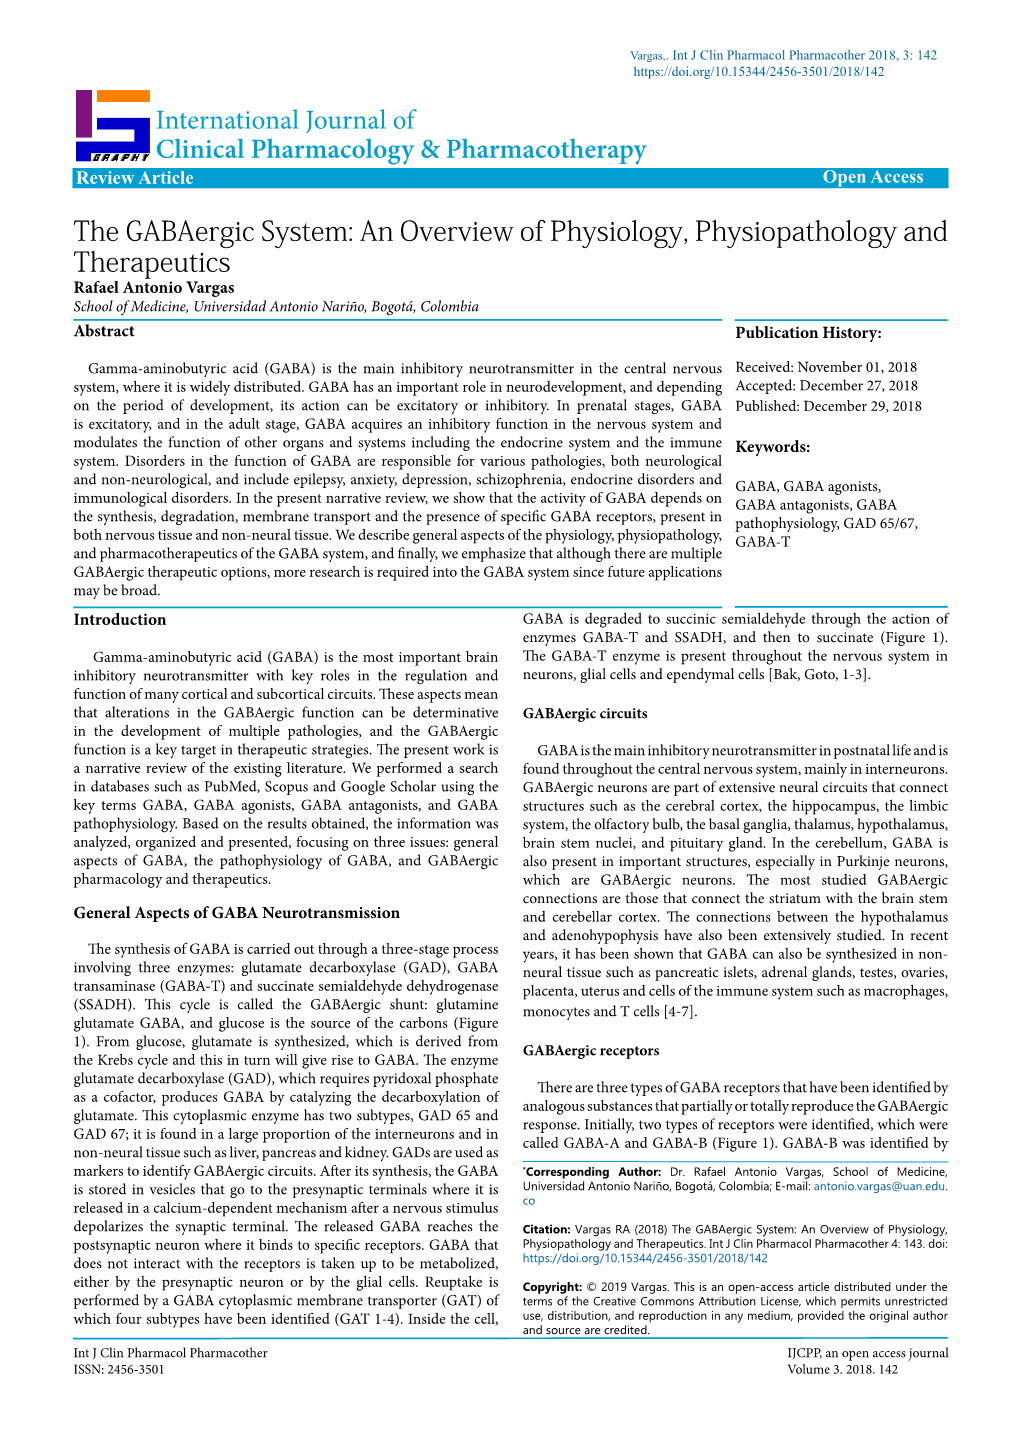 The Gabaergic System: an Overview of Physiology, Physiopathology And